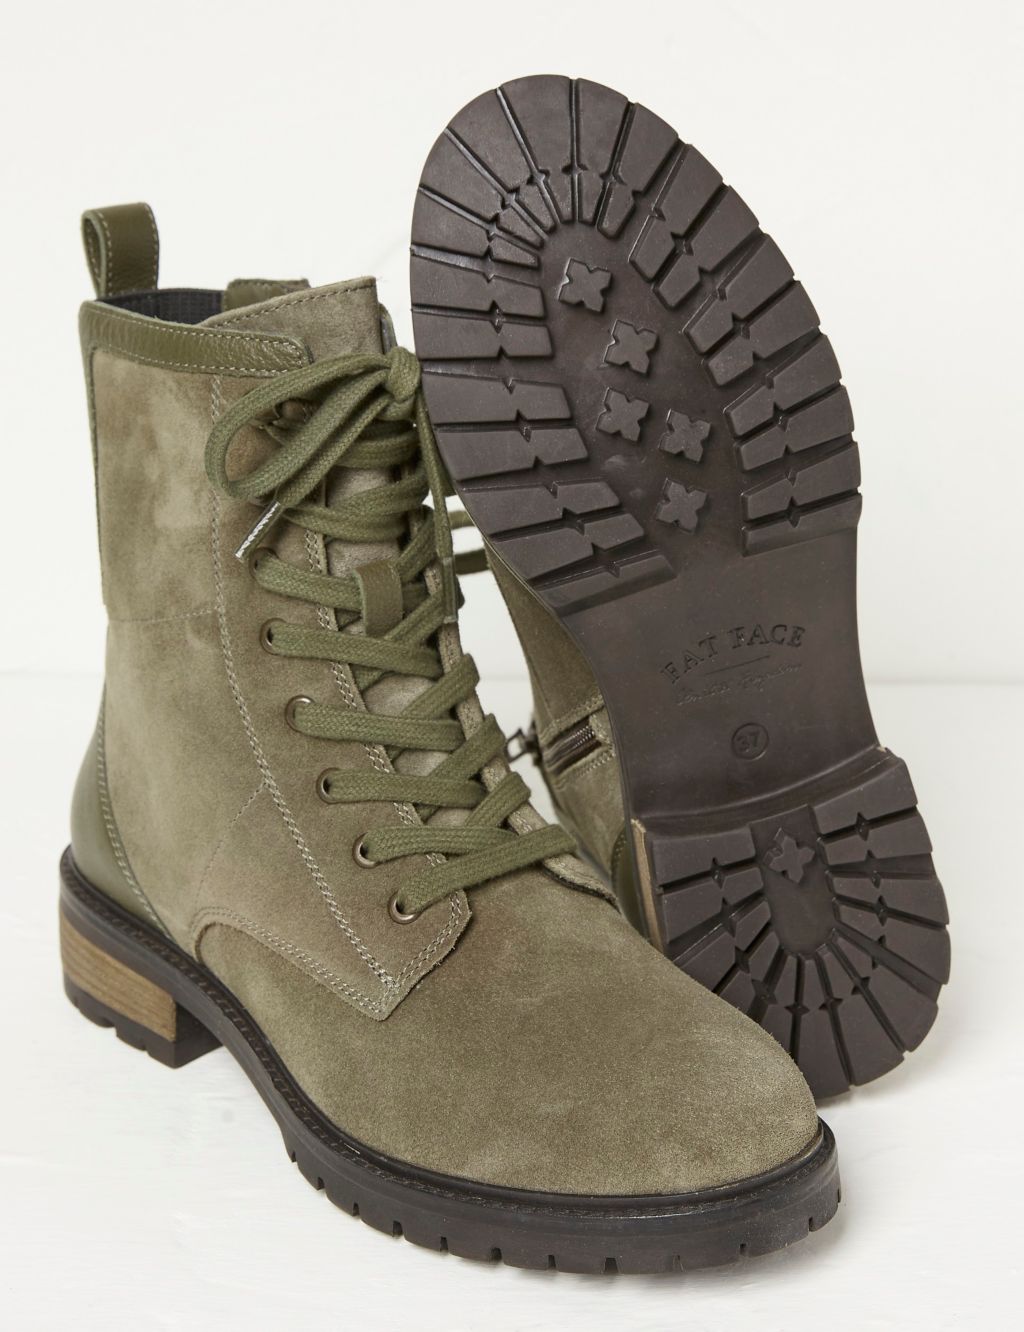 Suede Hiker Lace Up Block Heel Ankle Boots image 5